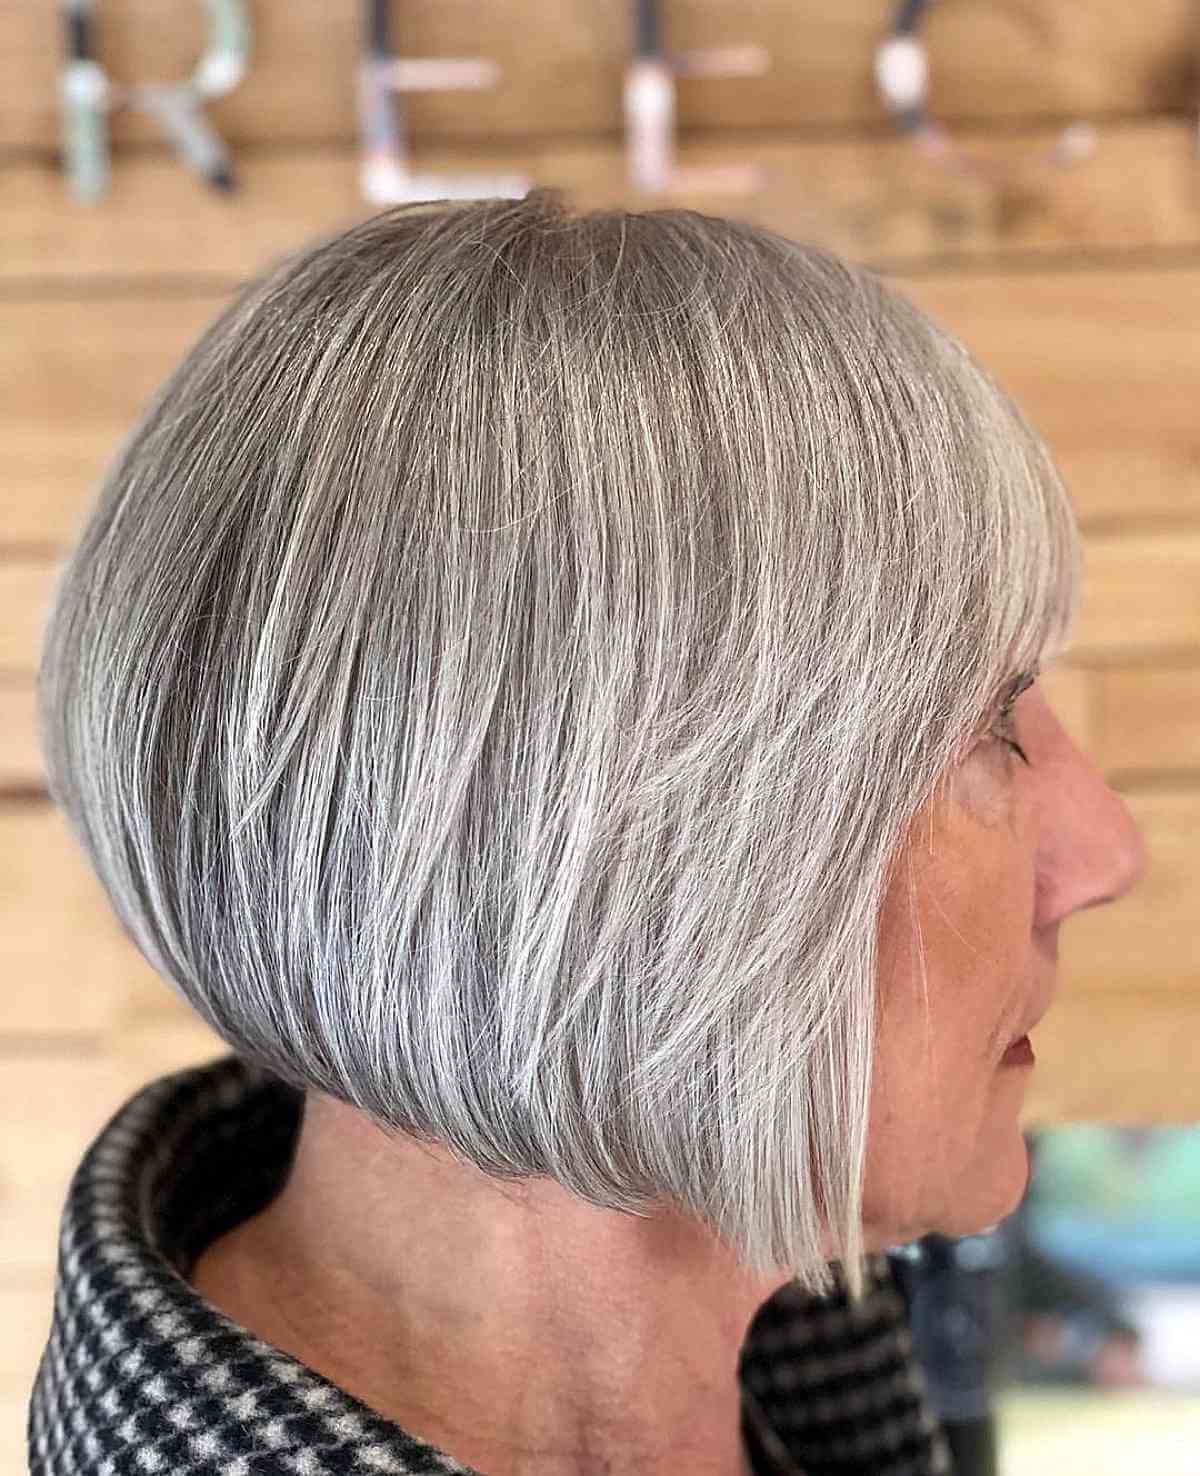 20 Flattering Short Hairstyles for Women In Their 60s with Grey Hair